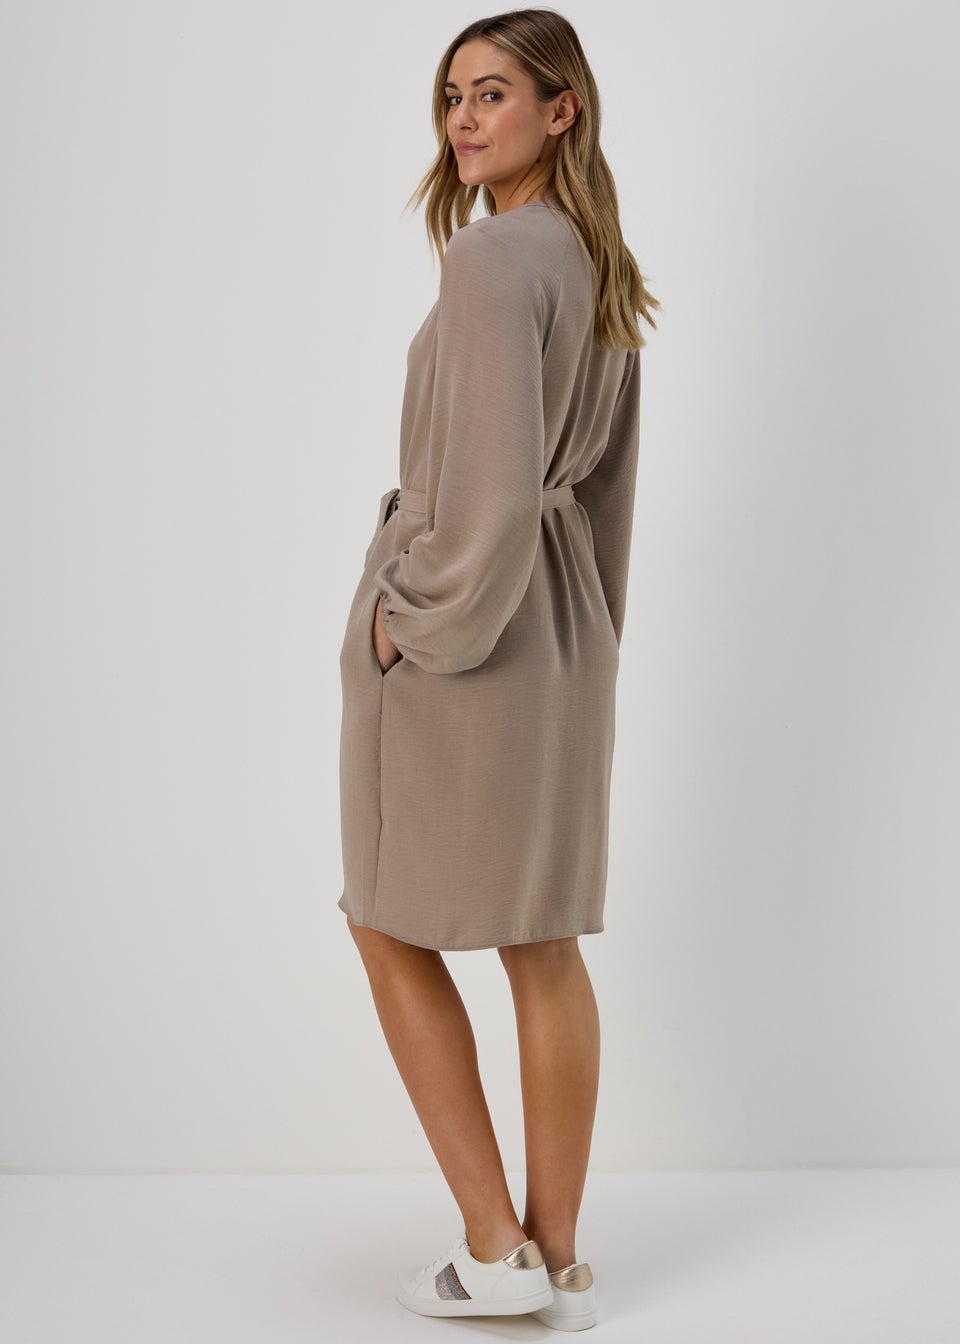 Taupe Belted Dress